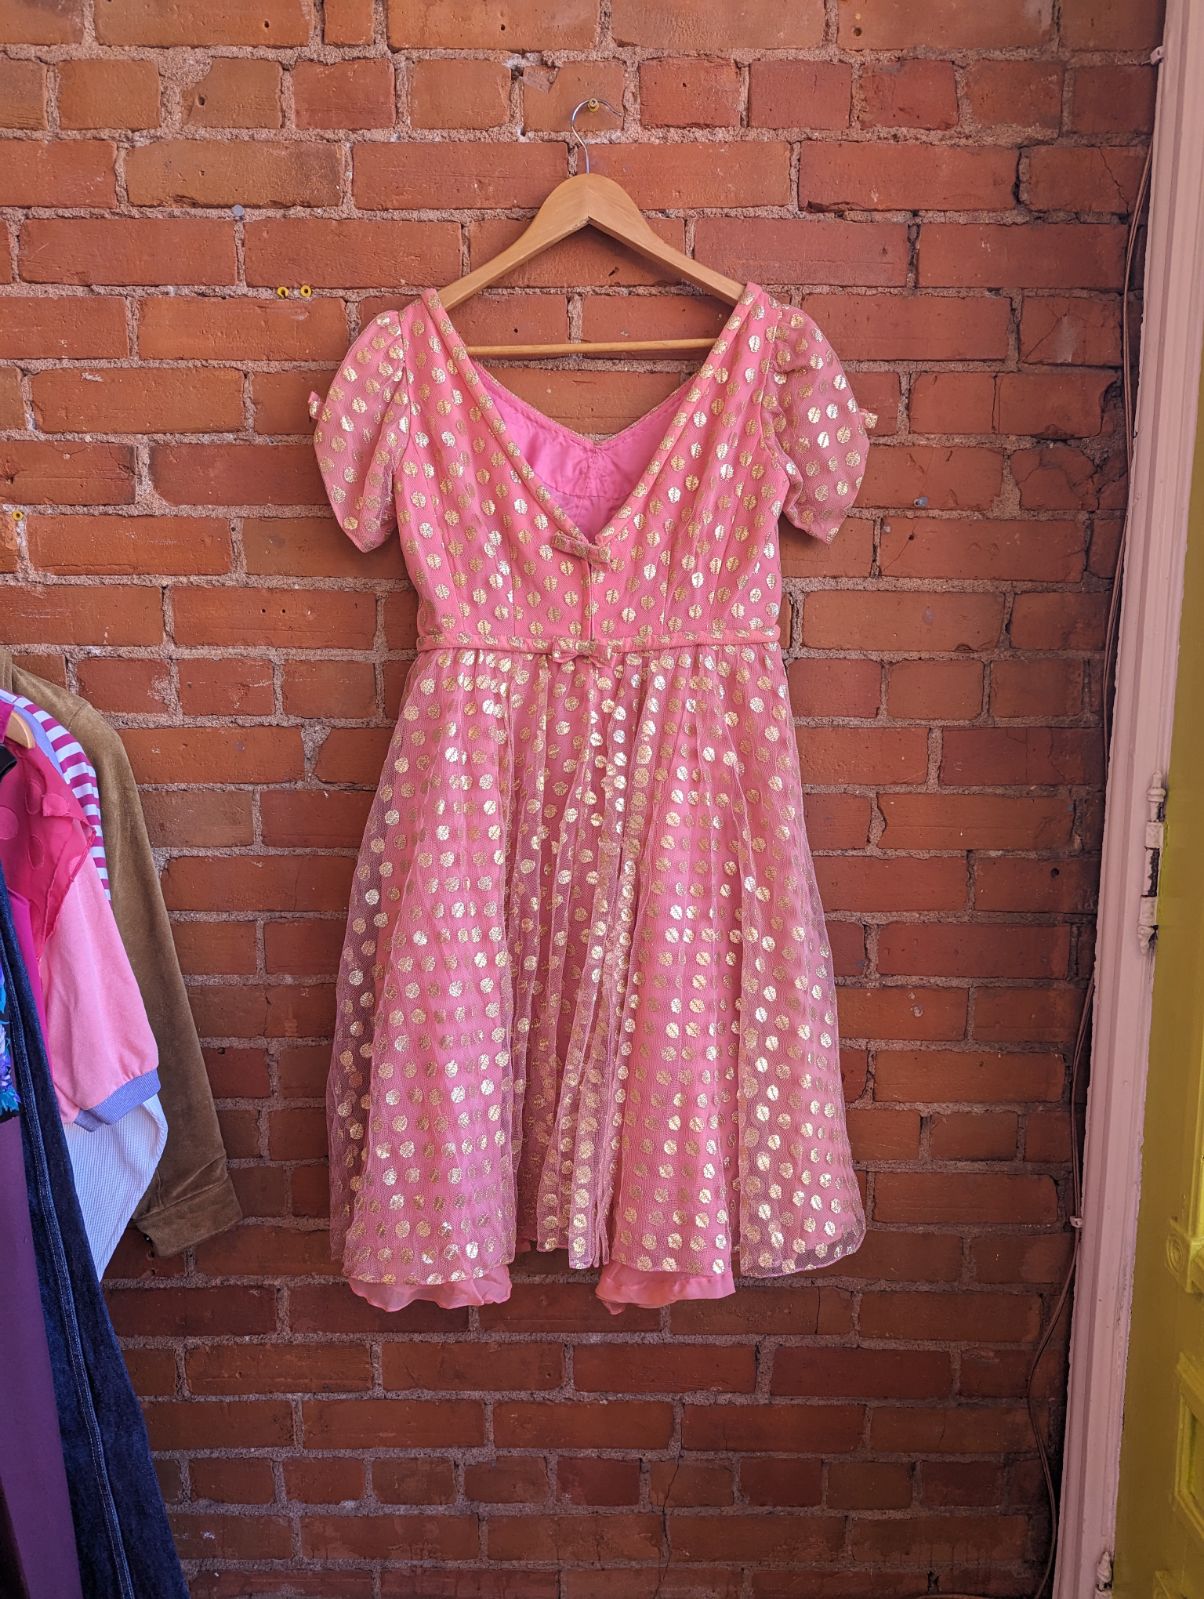 Lisa Gowns Toronto Pink Mini Dress With Gold Polka Dot Tulle Overlay